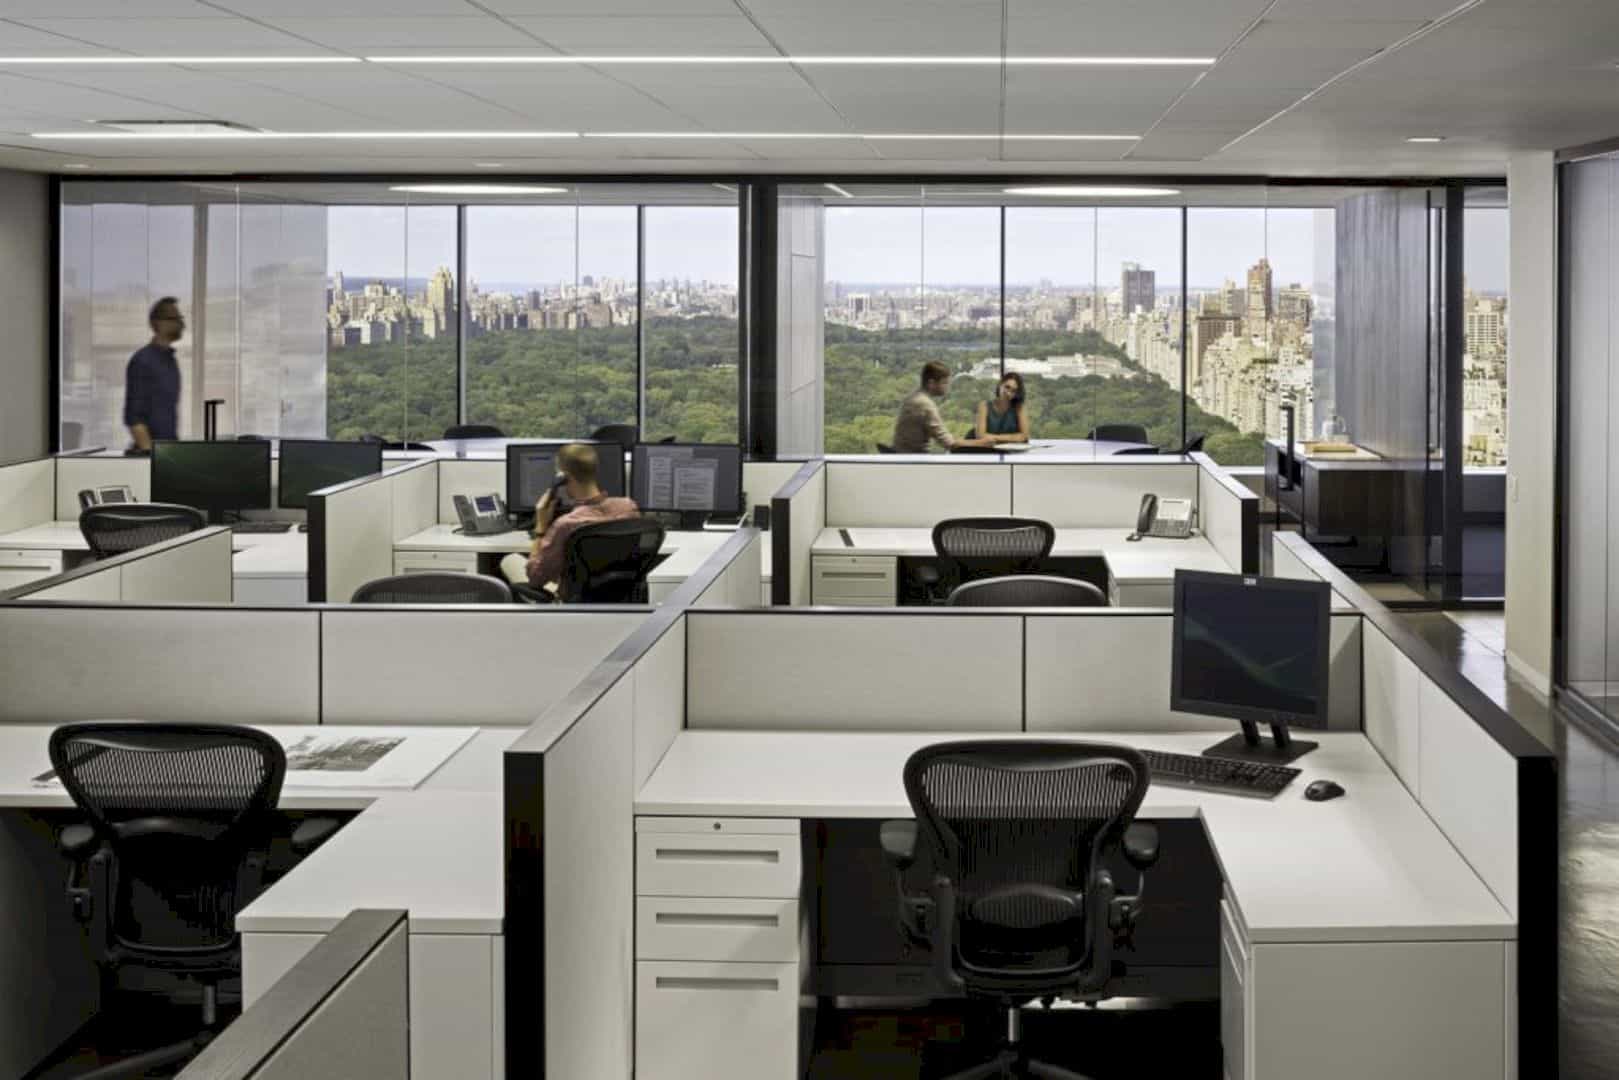 Central Park Office The Office Renovation Project To Increase Natural Light Exposure And Park Views 3